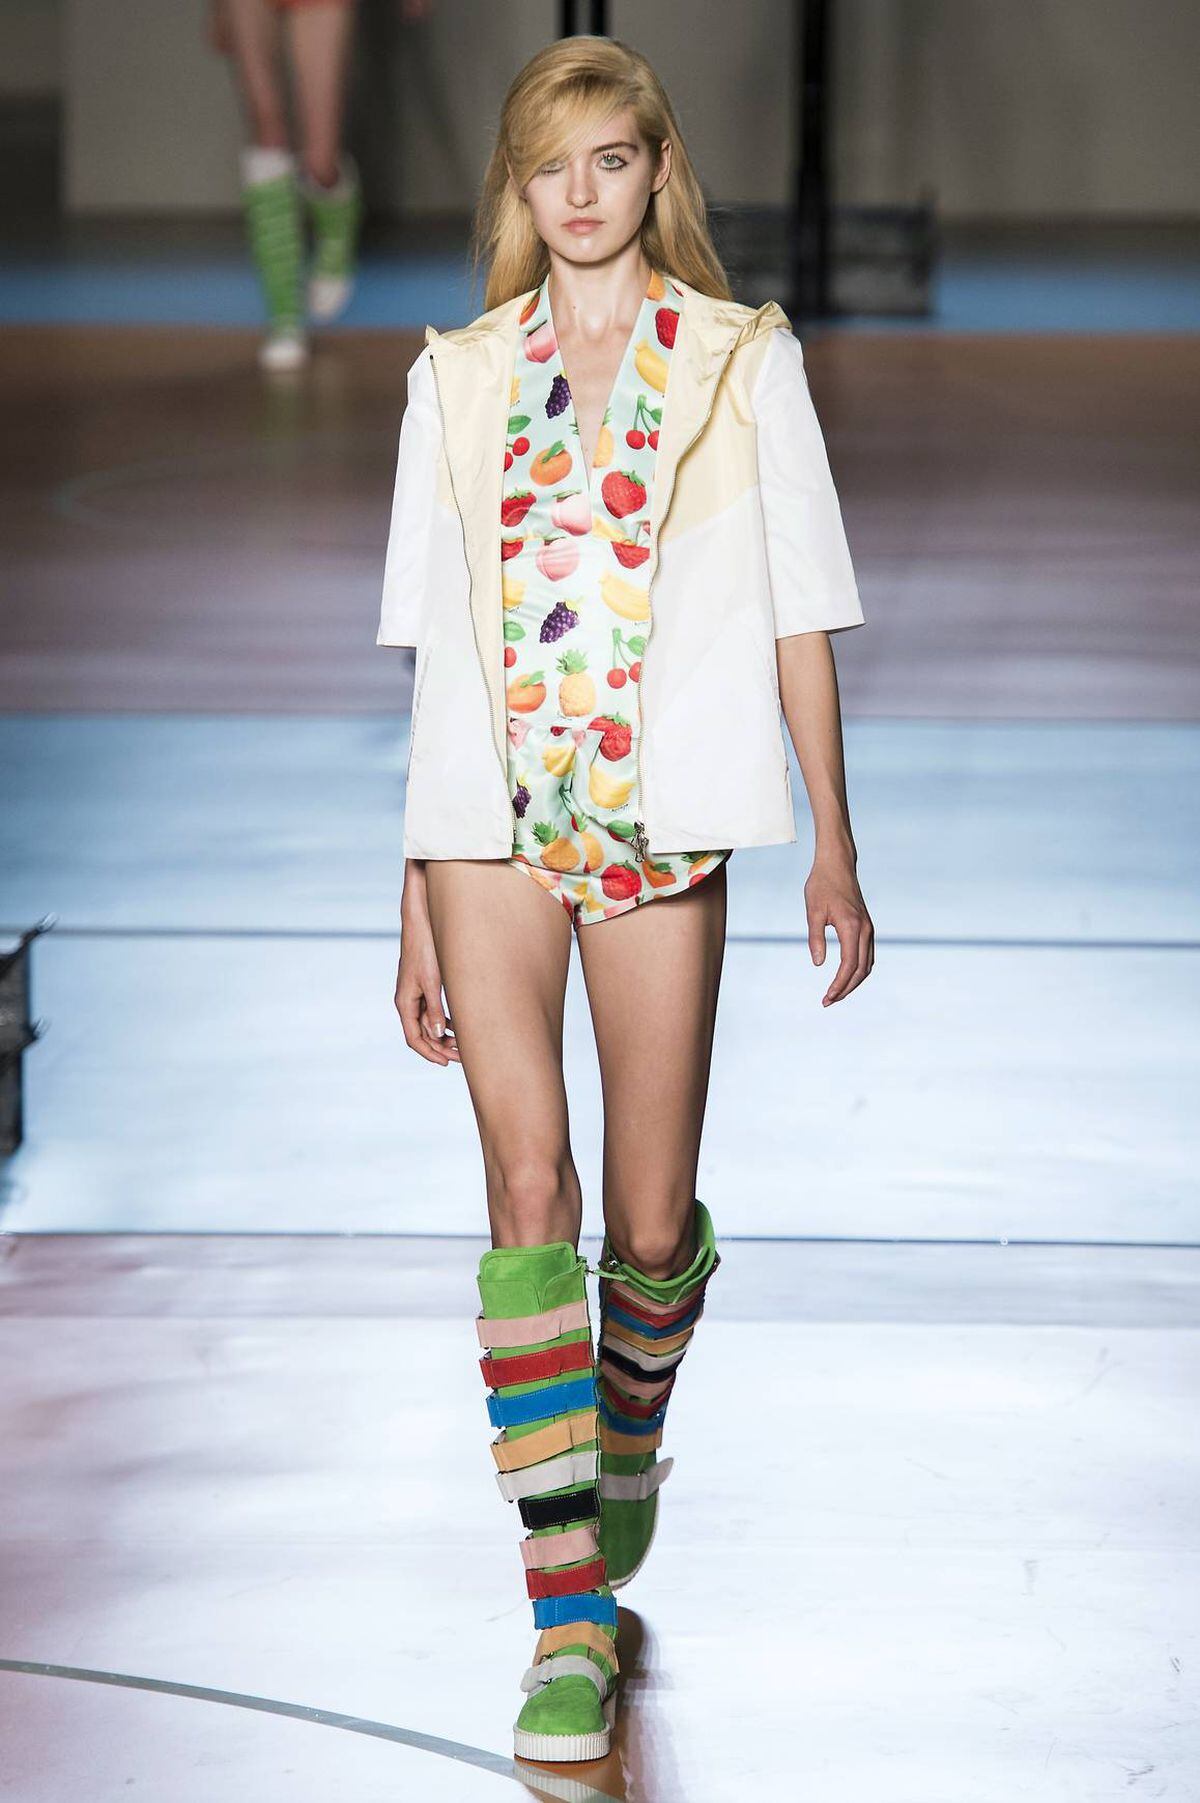 Sangria onesies, pineapple clutches: Fashion has gone loopy for fruit ...